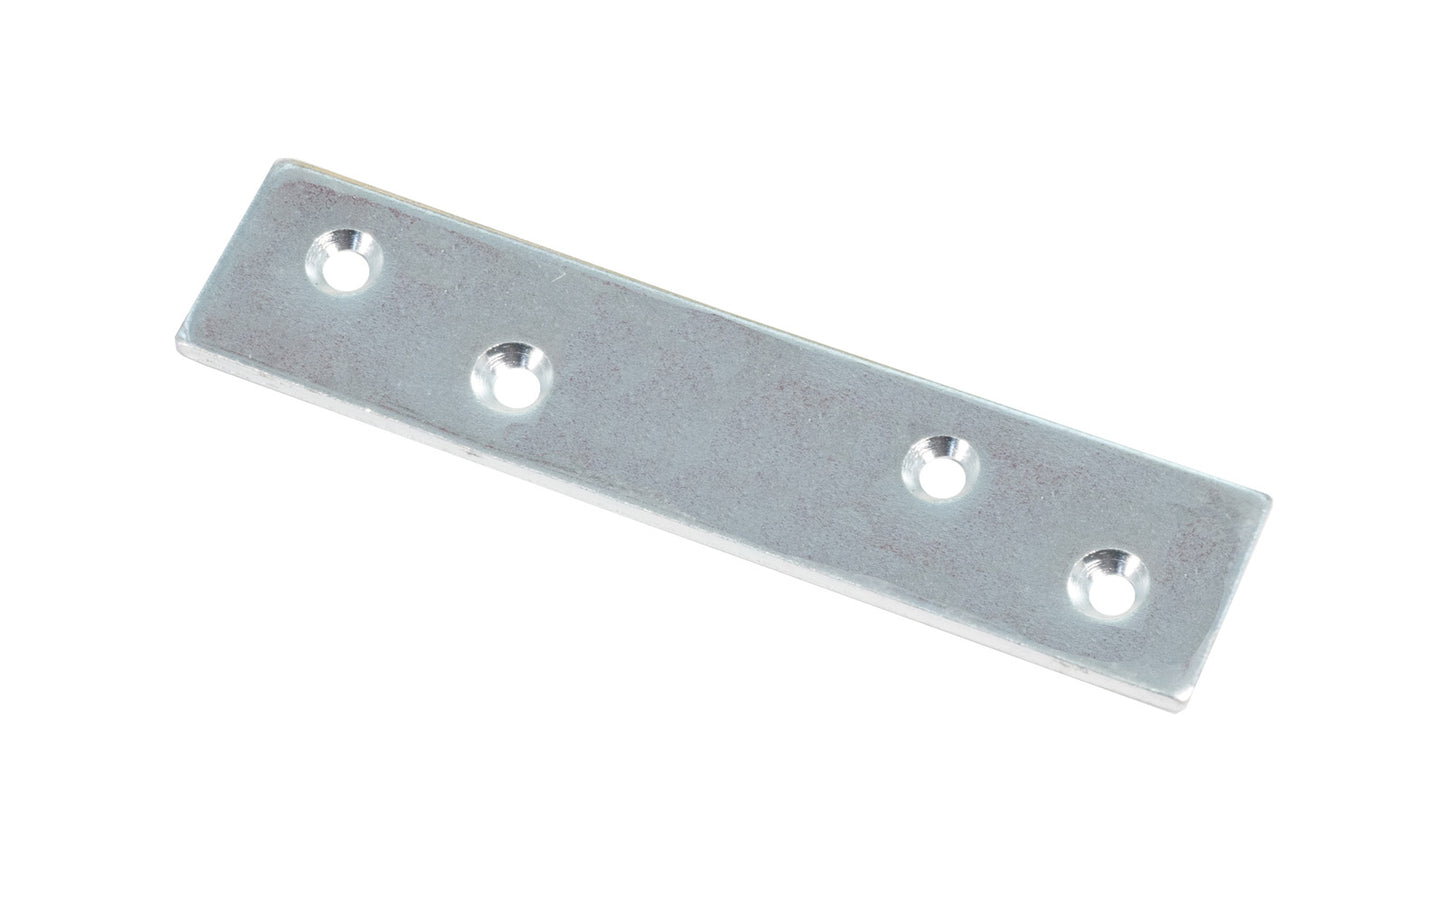 These flat mending plate irons are designed for furniture, cabinets, shelving support, etc. Allows for quick & easy repair of items in the workshop, home, & other applications. Made of steel material with a zinc plated finish. Countersunk holes. Sold as singles, or bulk box of (48) mending braces. 4"  long size. 